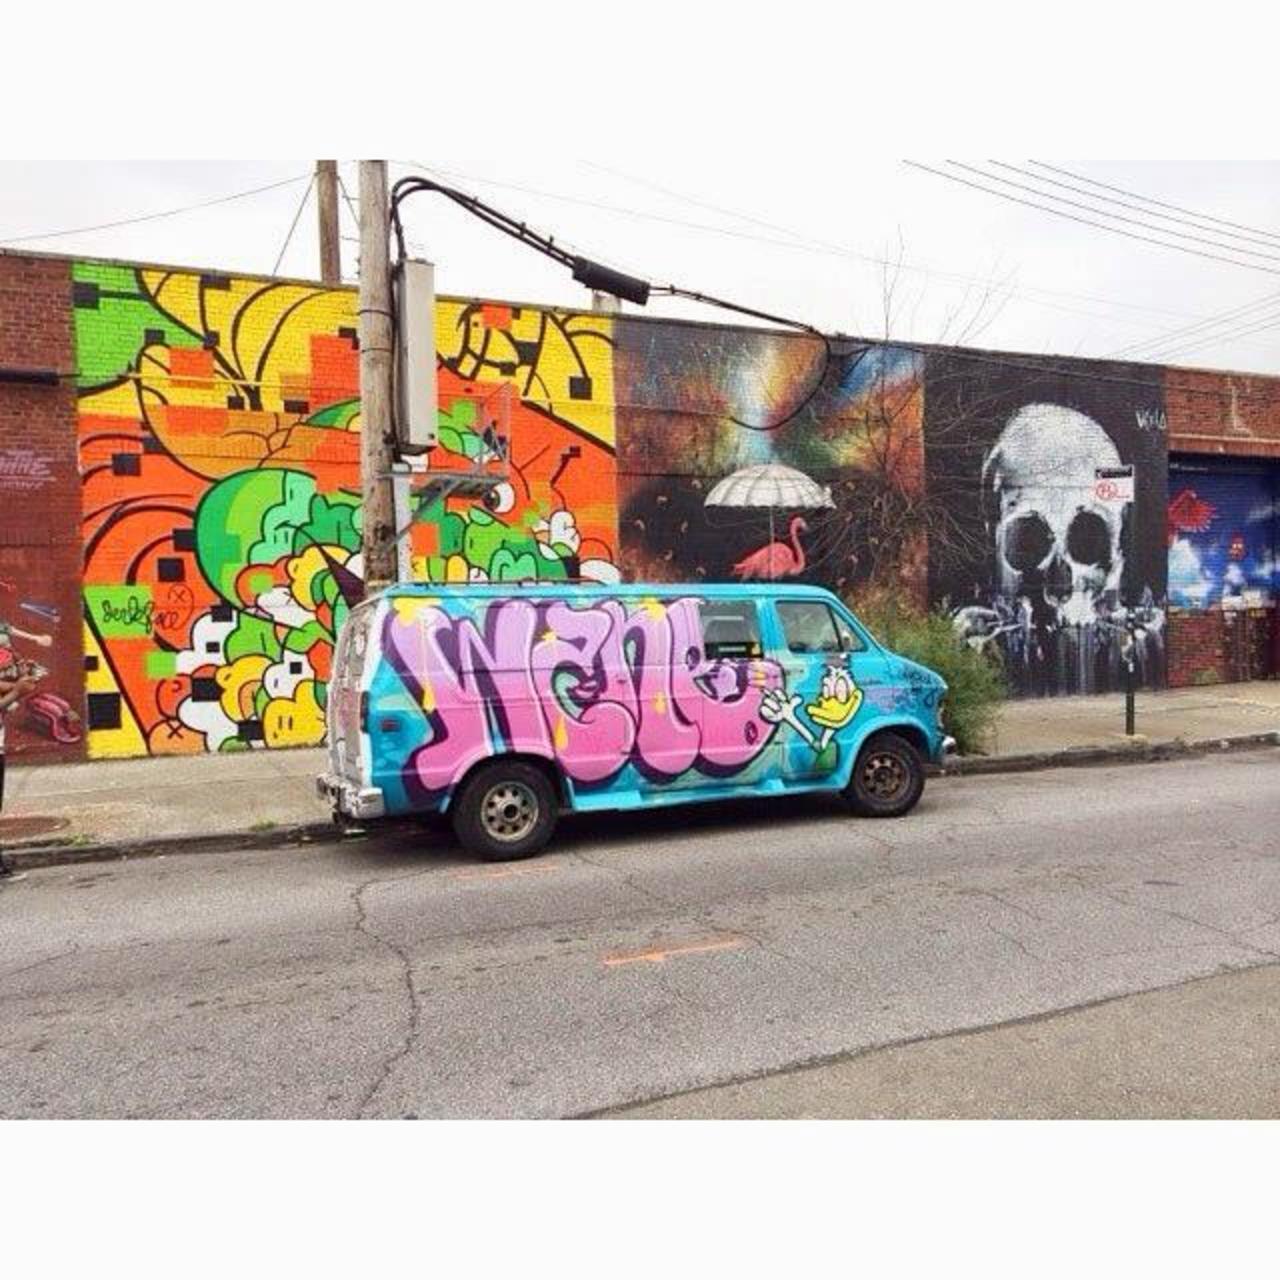 I saw this van in #brooklyn . Does anyone know of the #artist ? #streetart #graffiti http://t.co/e7m4RBUzGS